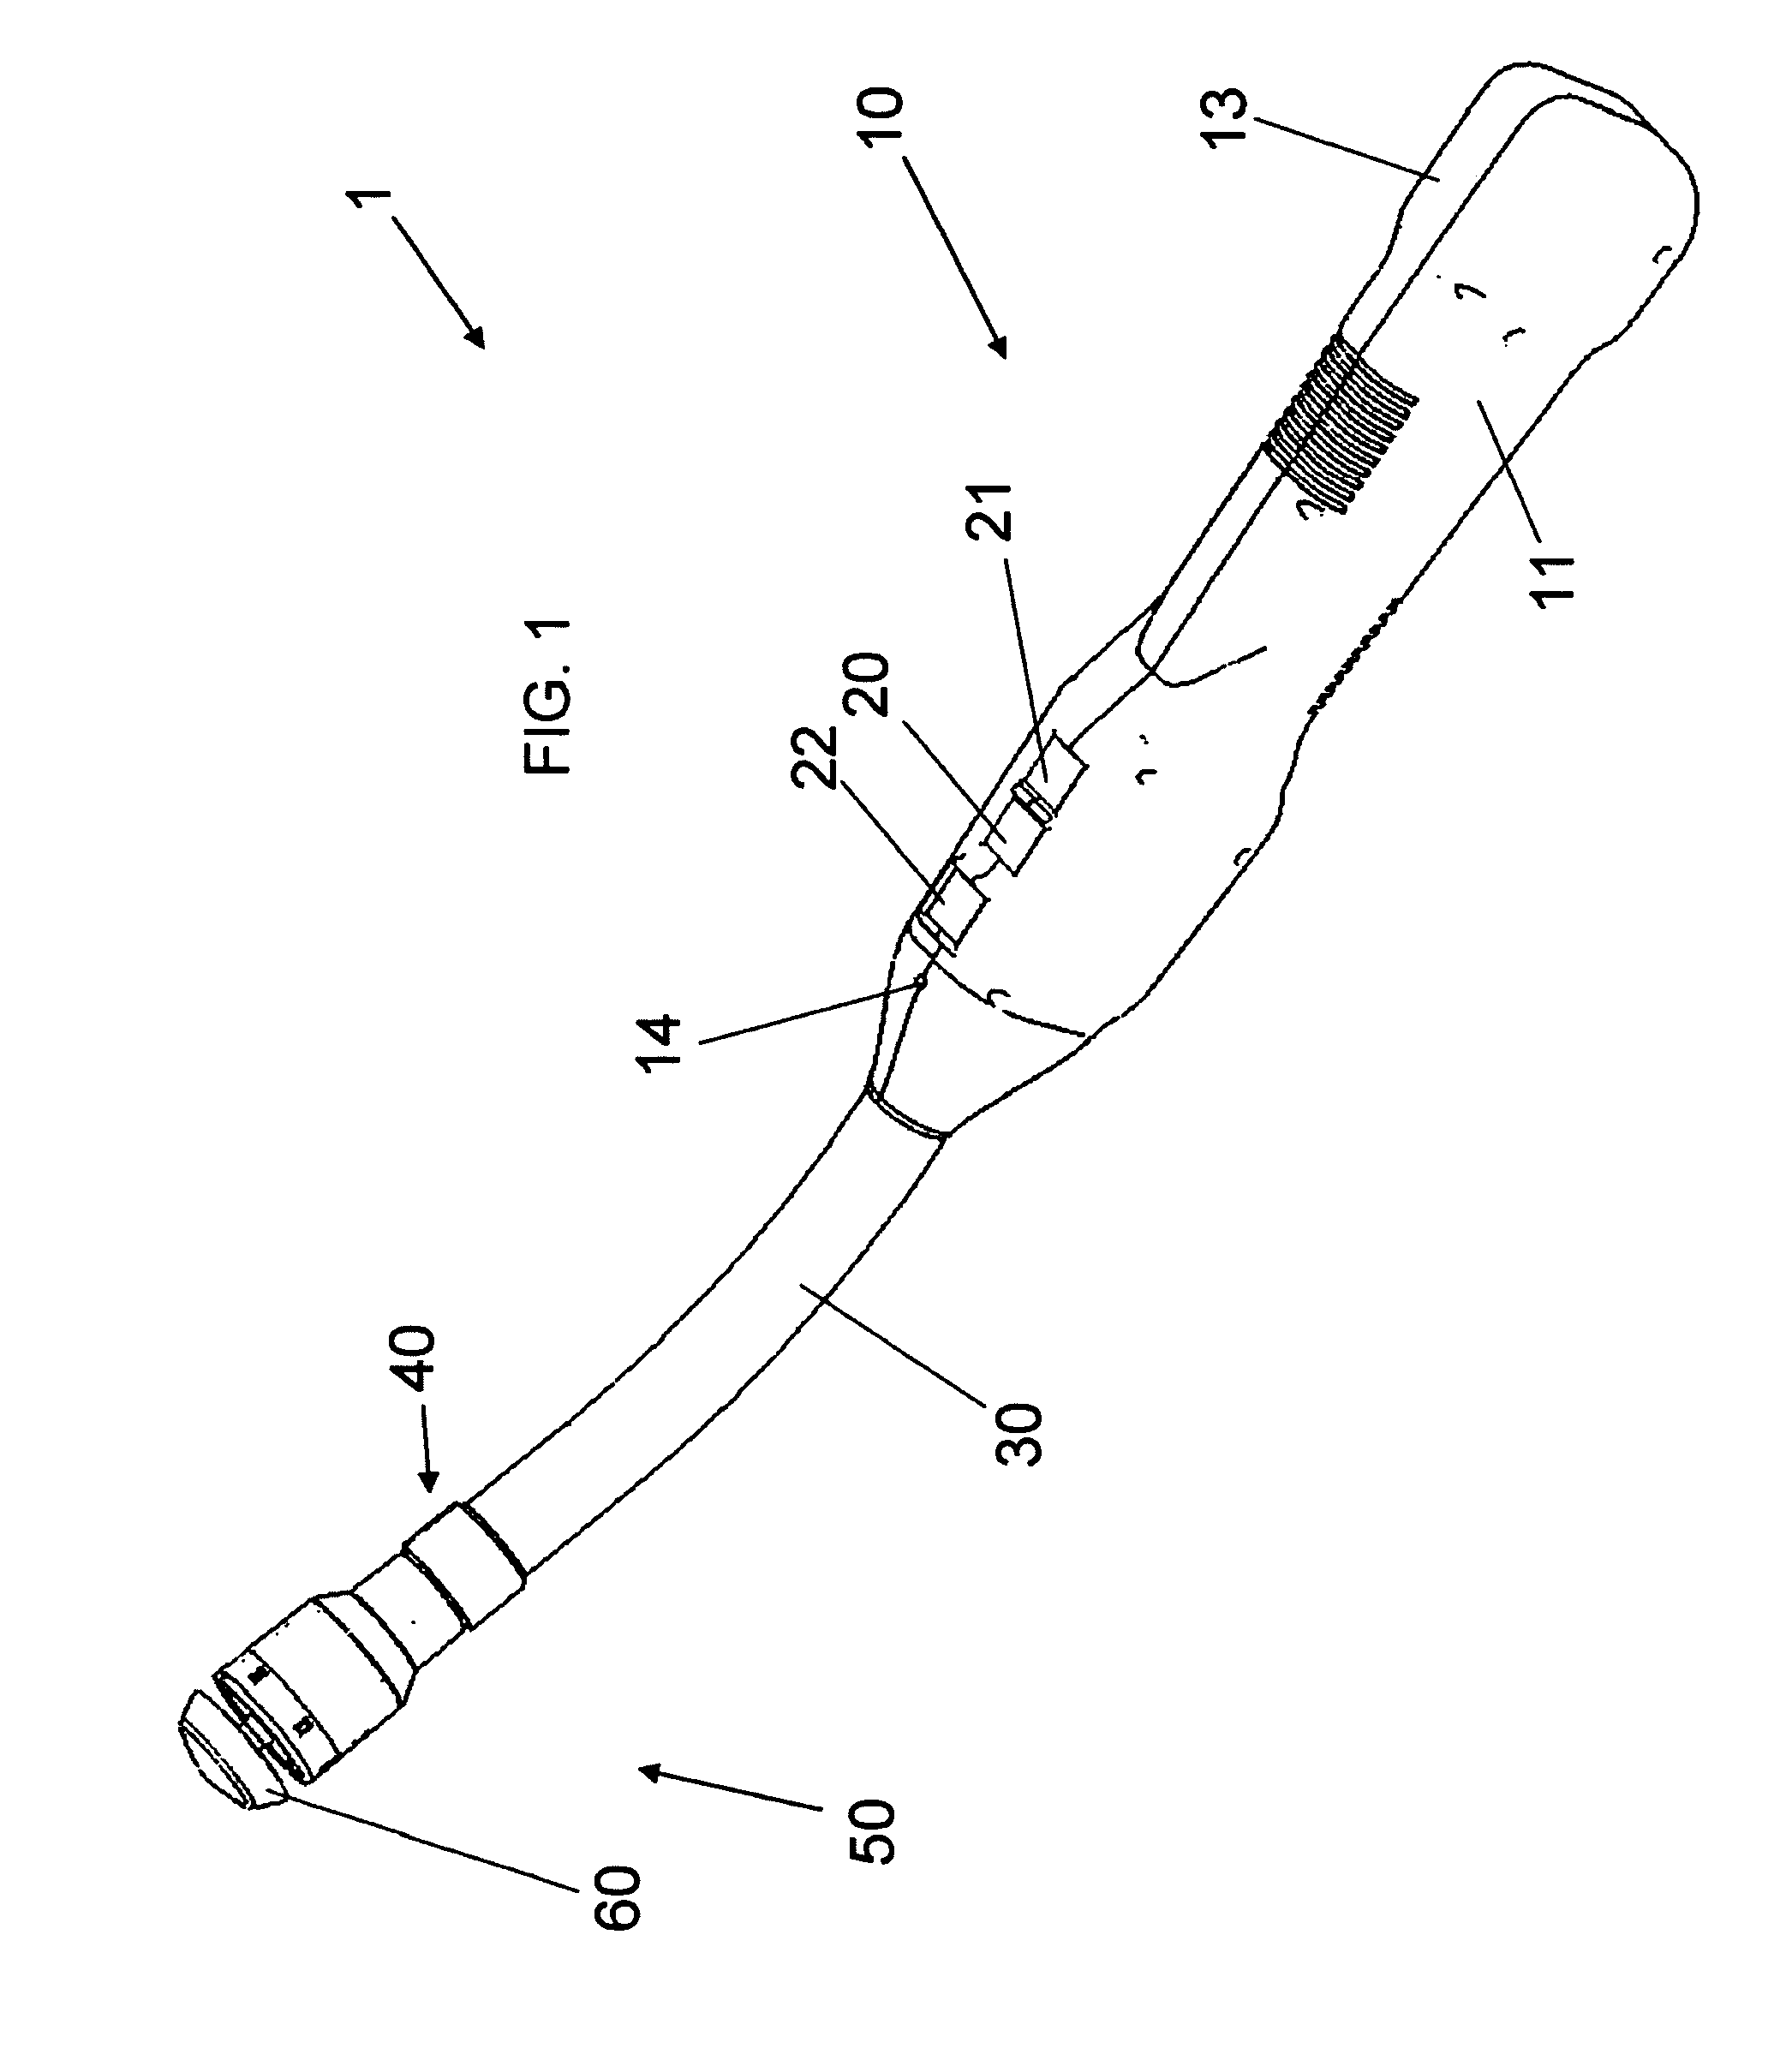 Method for Operating an Electrical Surgical Instrument with Optimal Tissue Compression